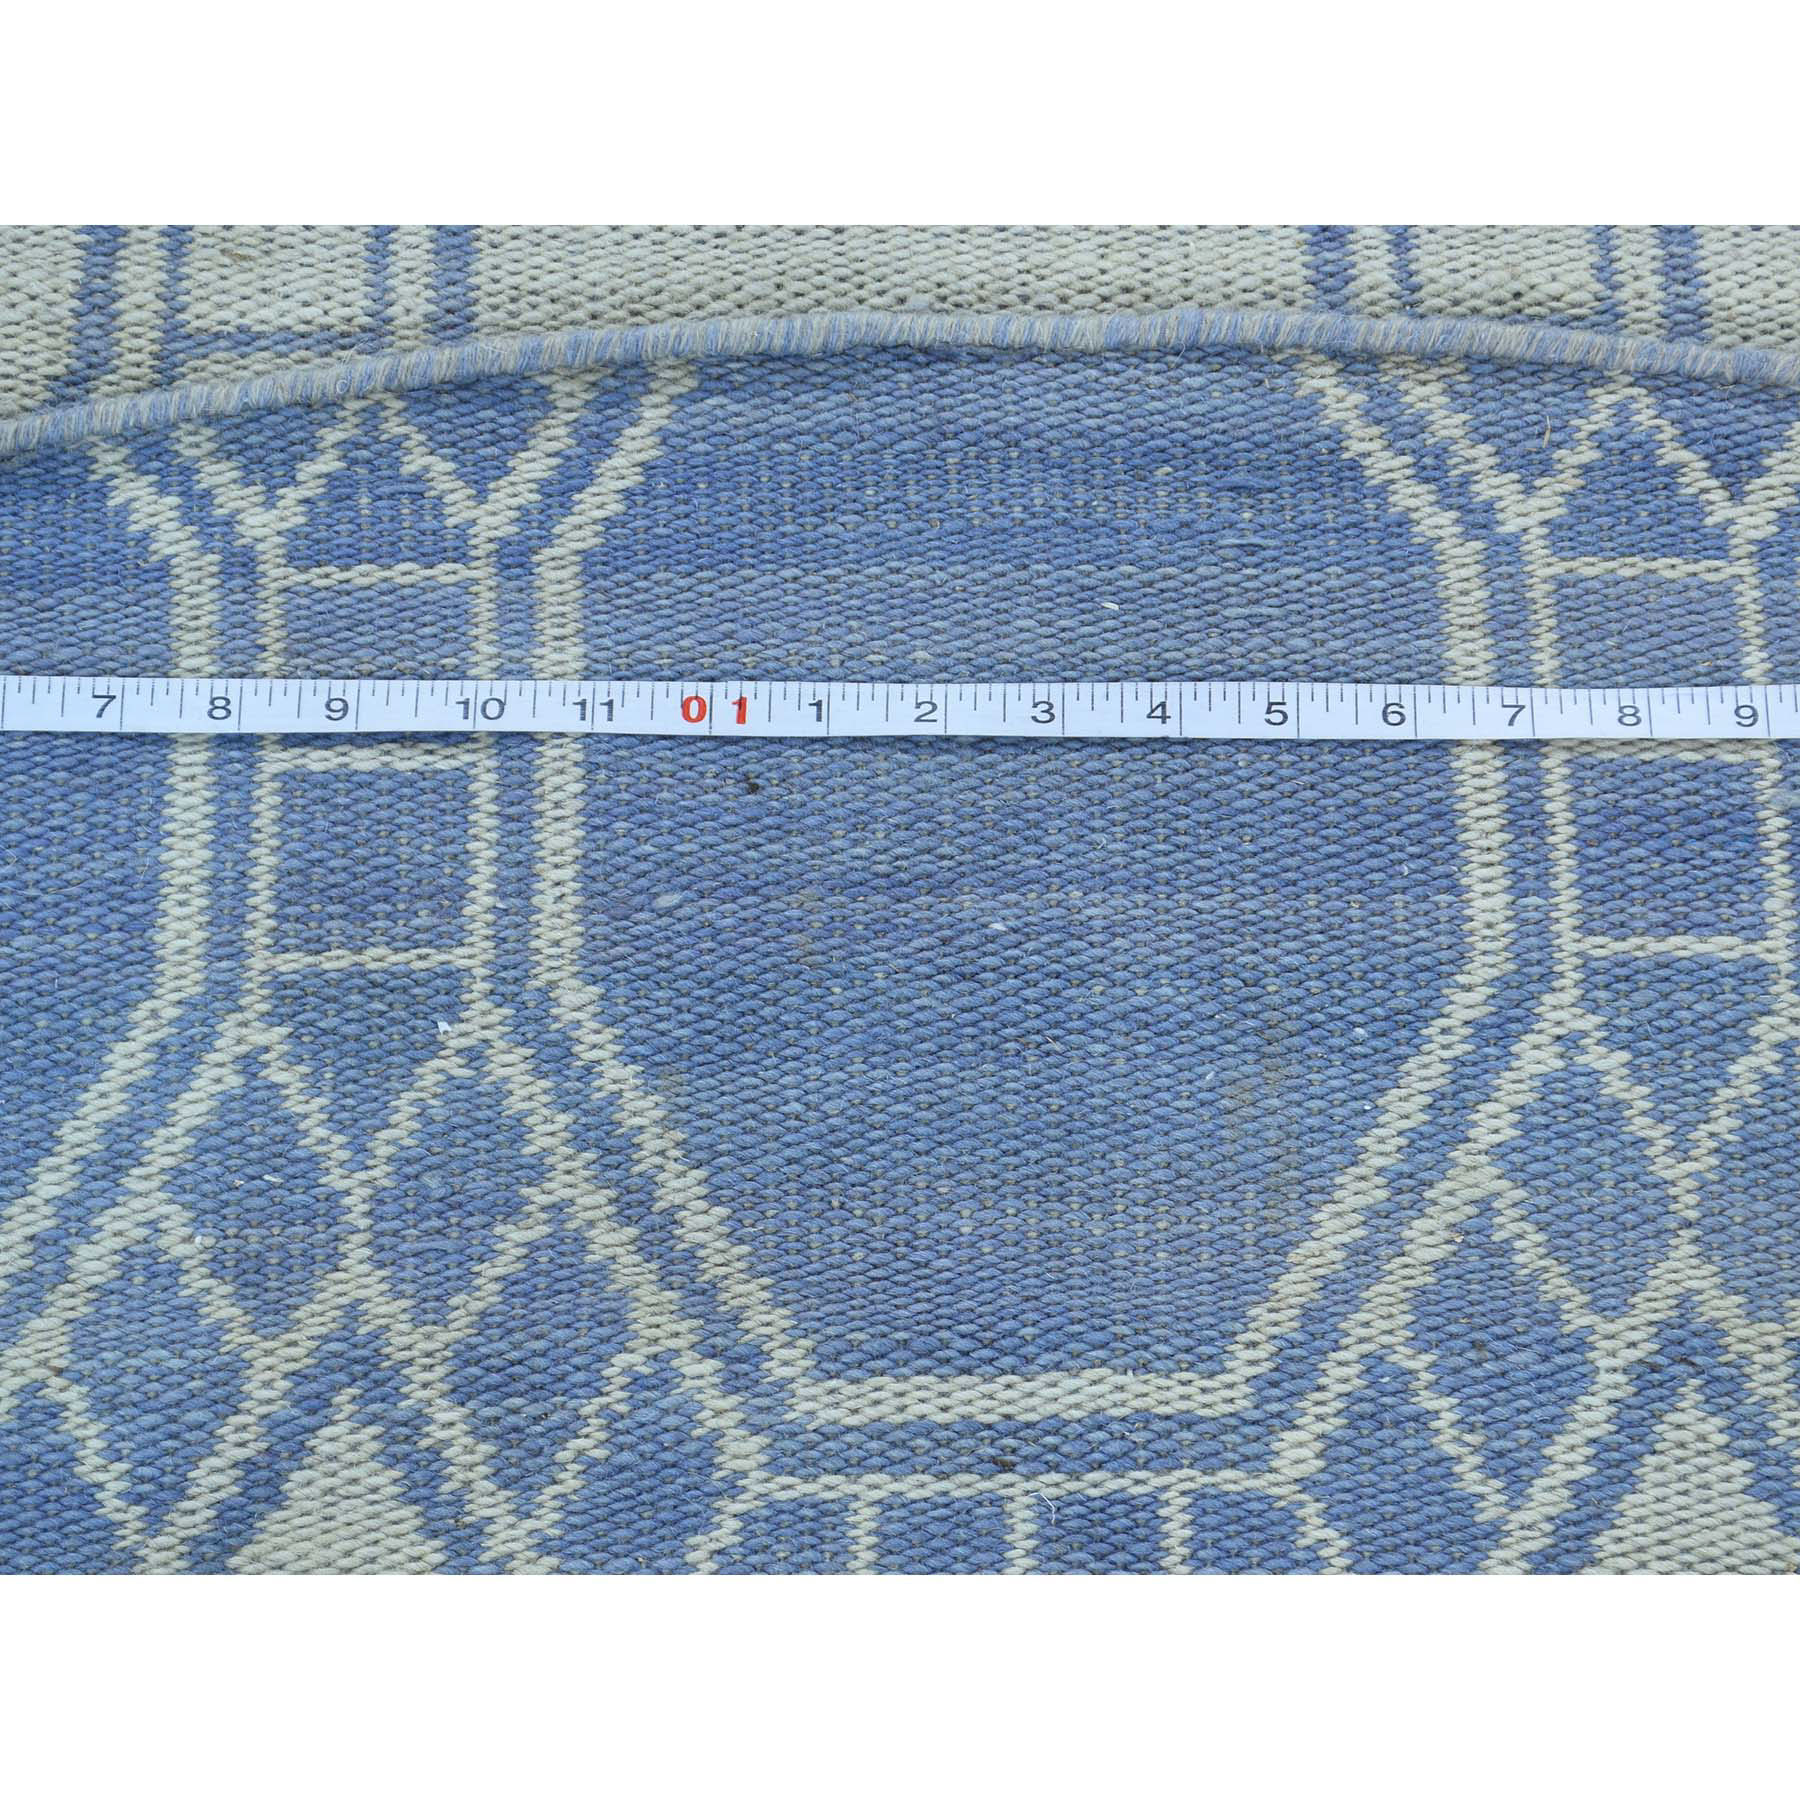 9-8 x9-8  Hand-Woven Flat Weave Reversible Durie Kilim Round Oriental Rug 